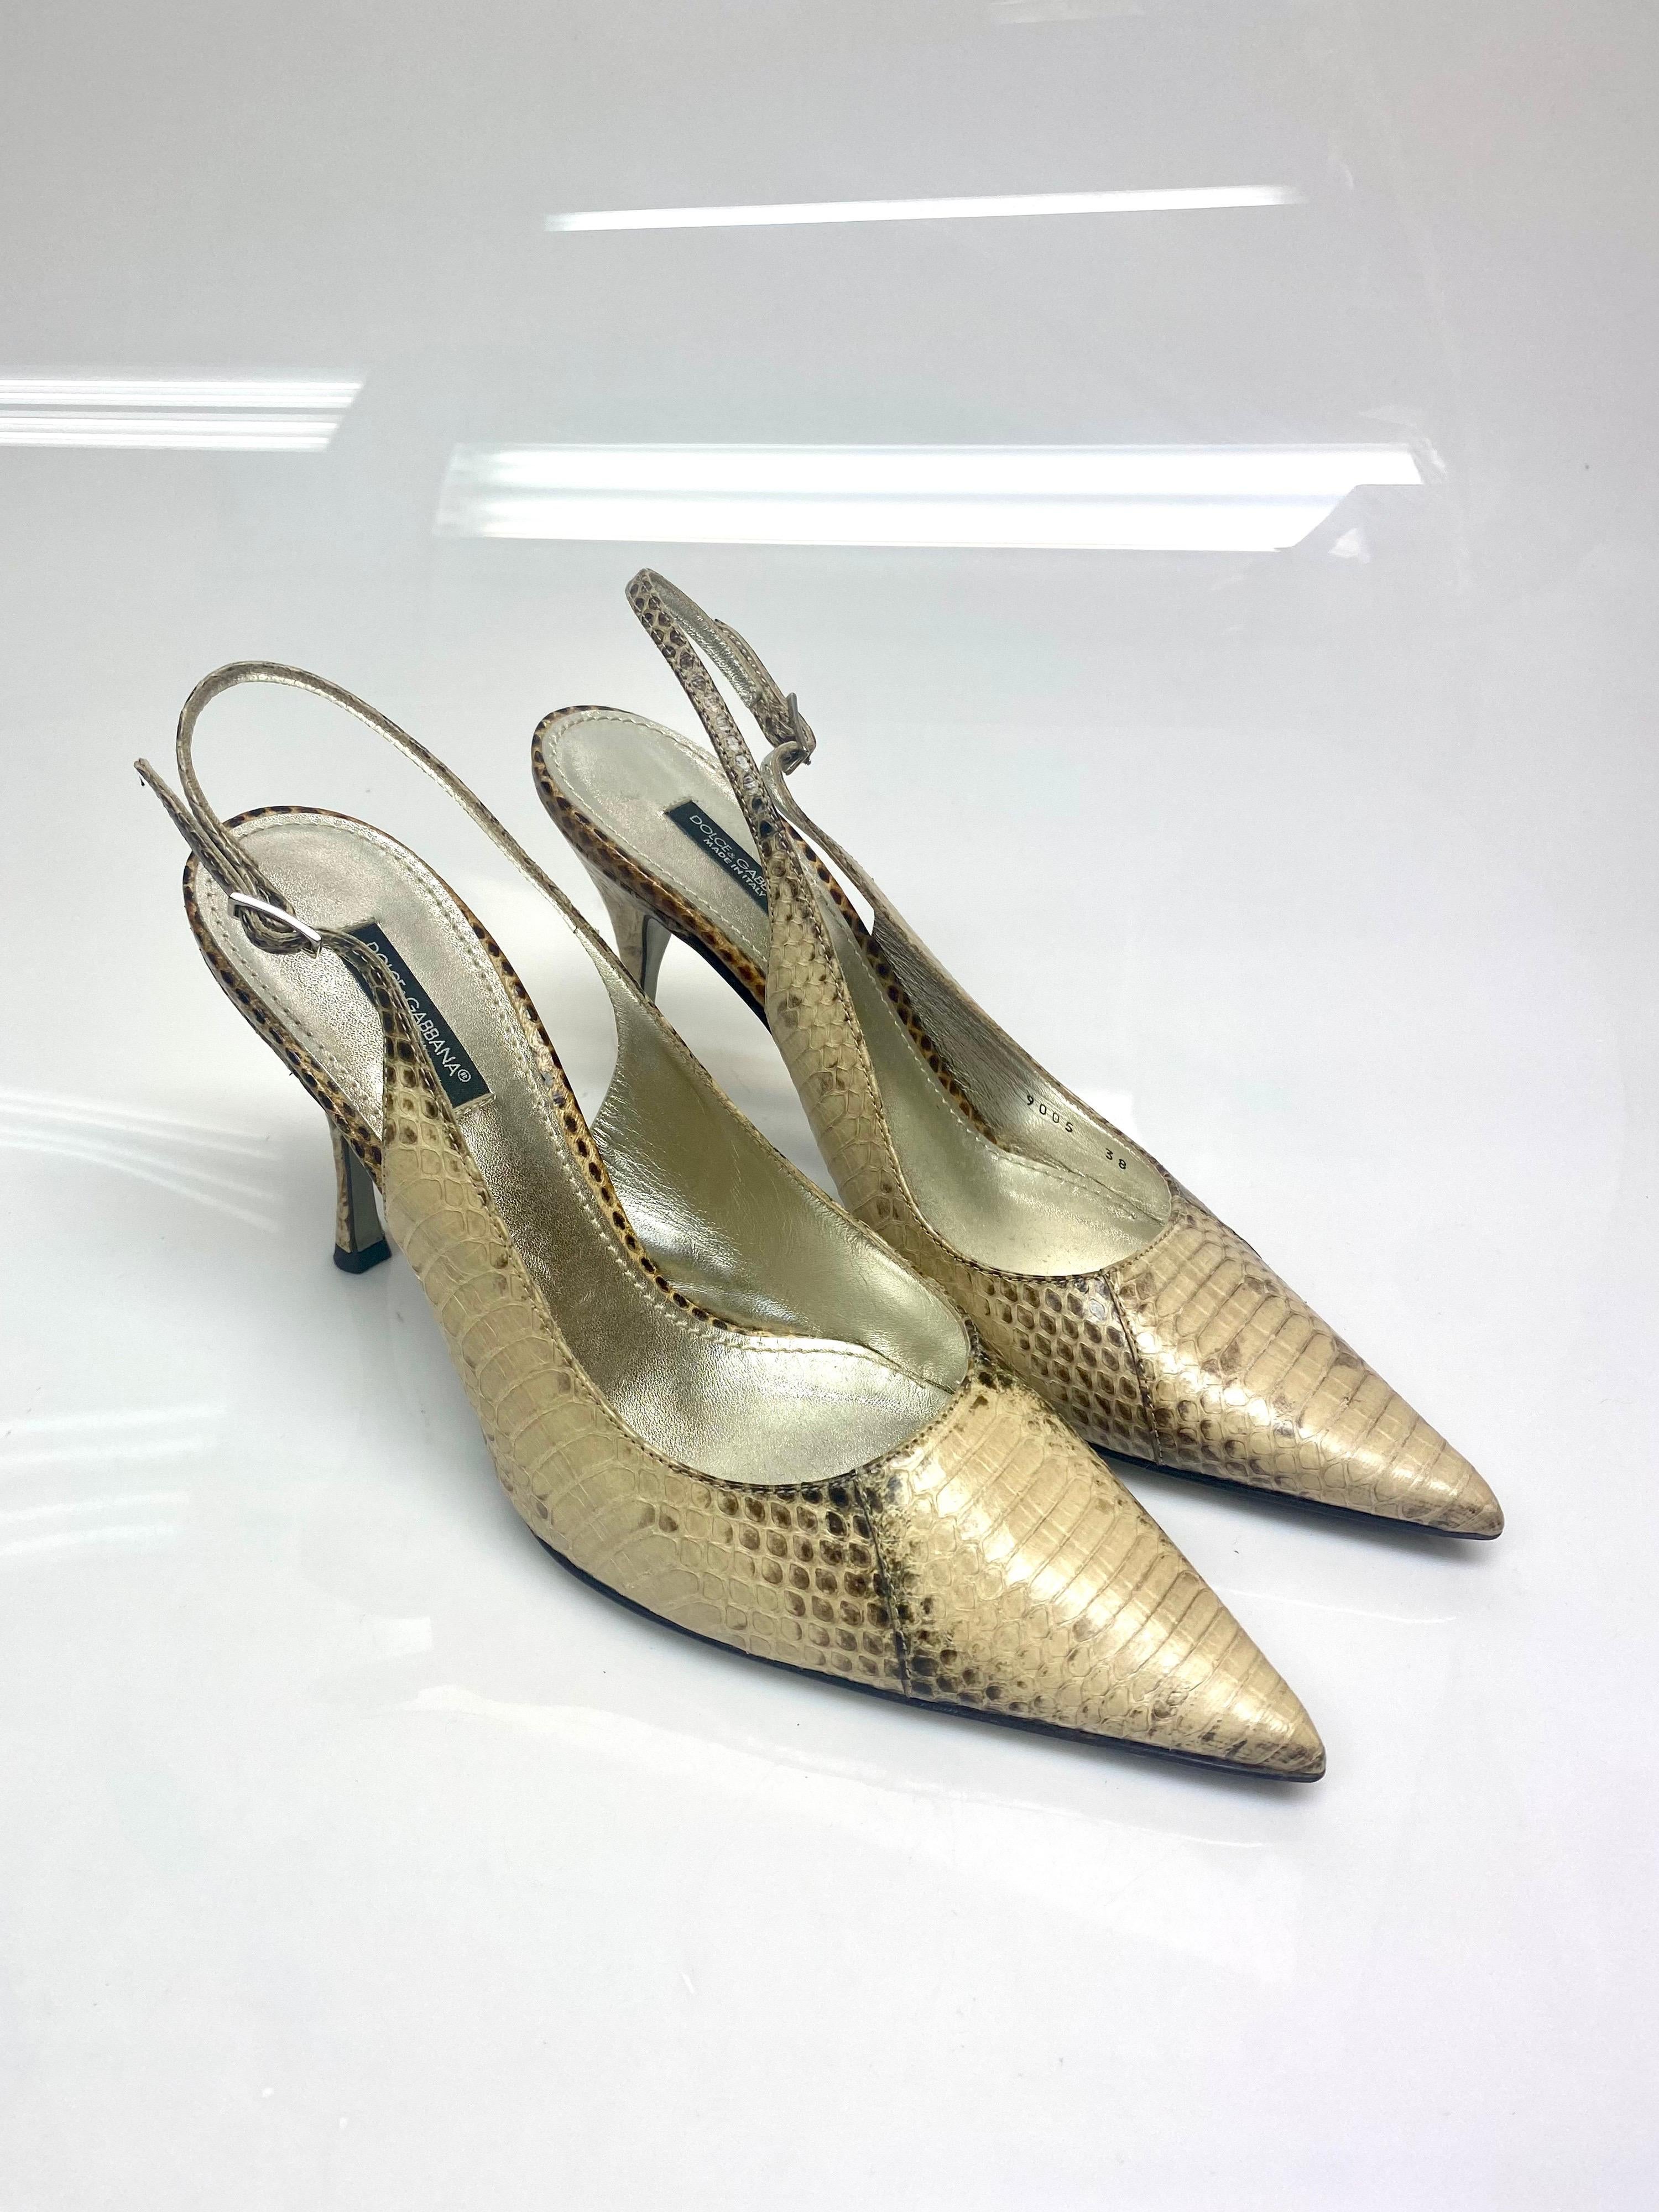 Dolce & Gabbana Beige Snake Slingback Heels Size 38. These beautiful creations by Dolce & Gabbana are a stunning pair to add to any closet. Featuring a pointed toe and slingback style shoe for that touch of sophistication. Item is in excellent